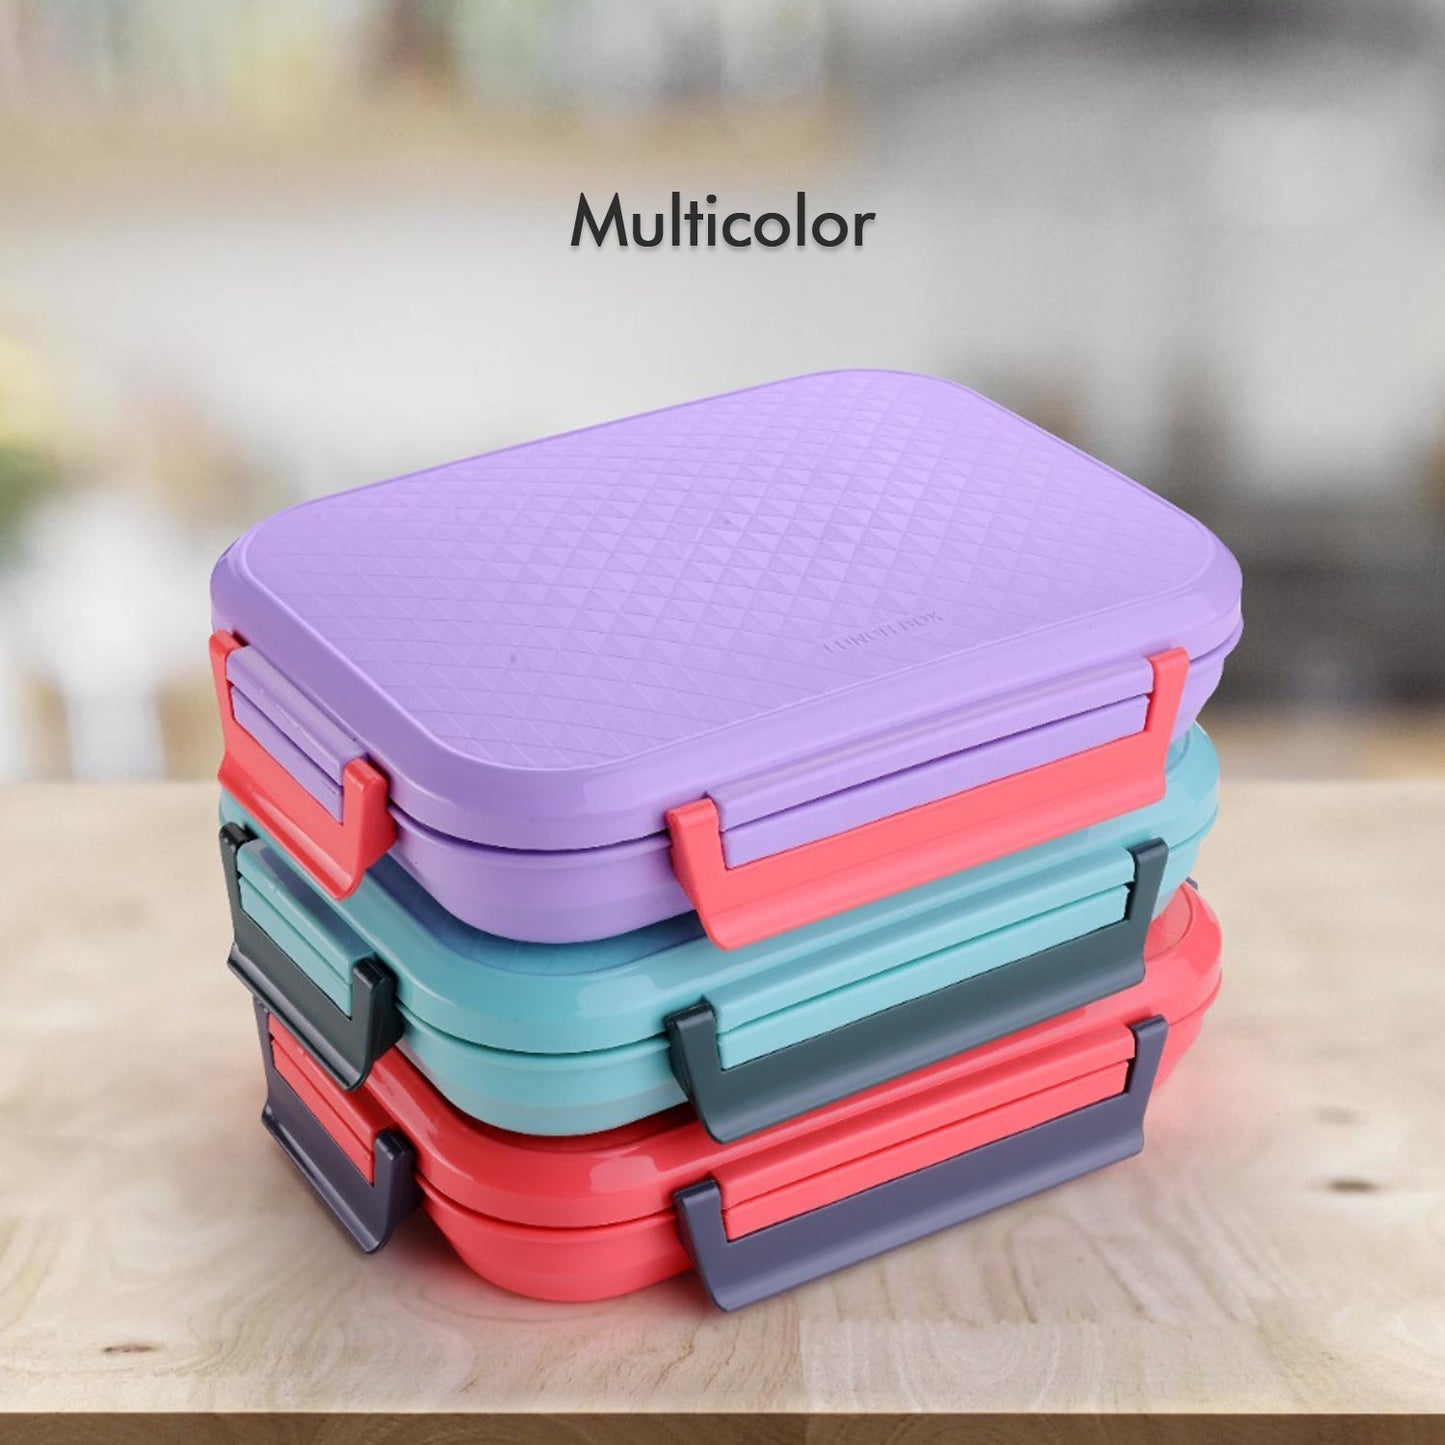 Break Time Lunch Box Steel Plate Multi Compartment Lunch Box Carry To All Type lunch In Lunch Box & Premium Quality Lunch Box ideal For Office, School Kids & Travelling Ideal